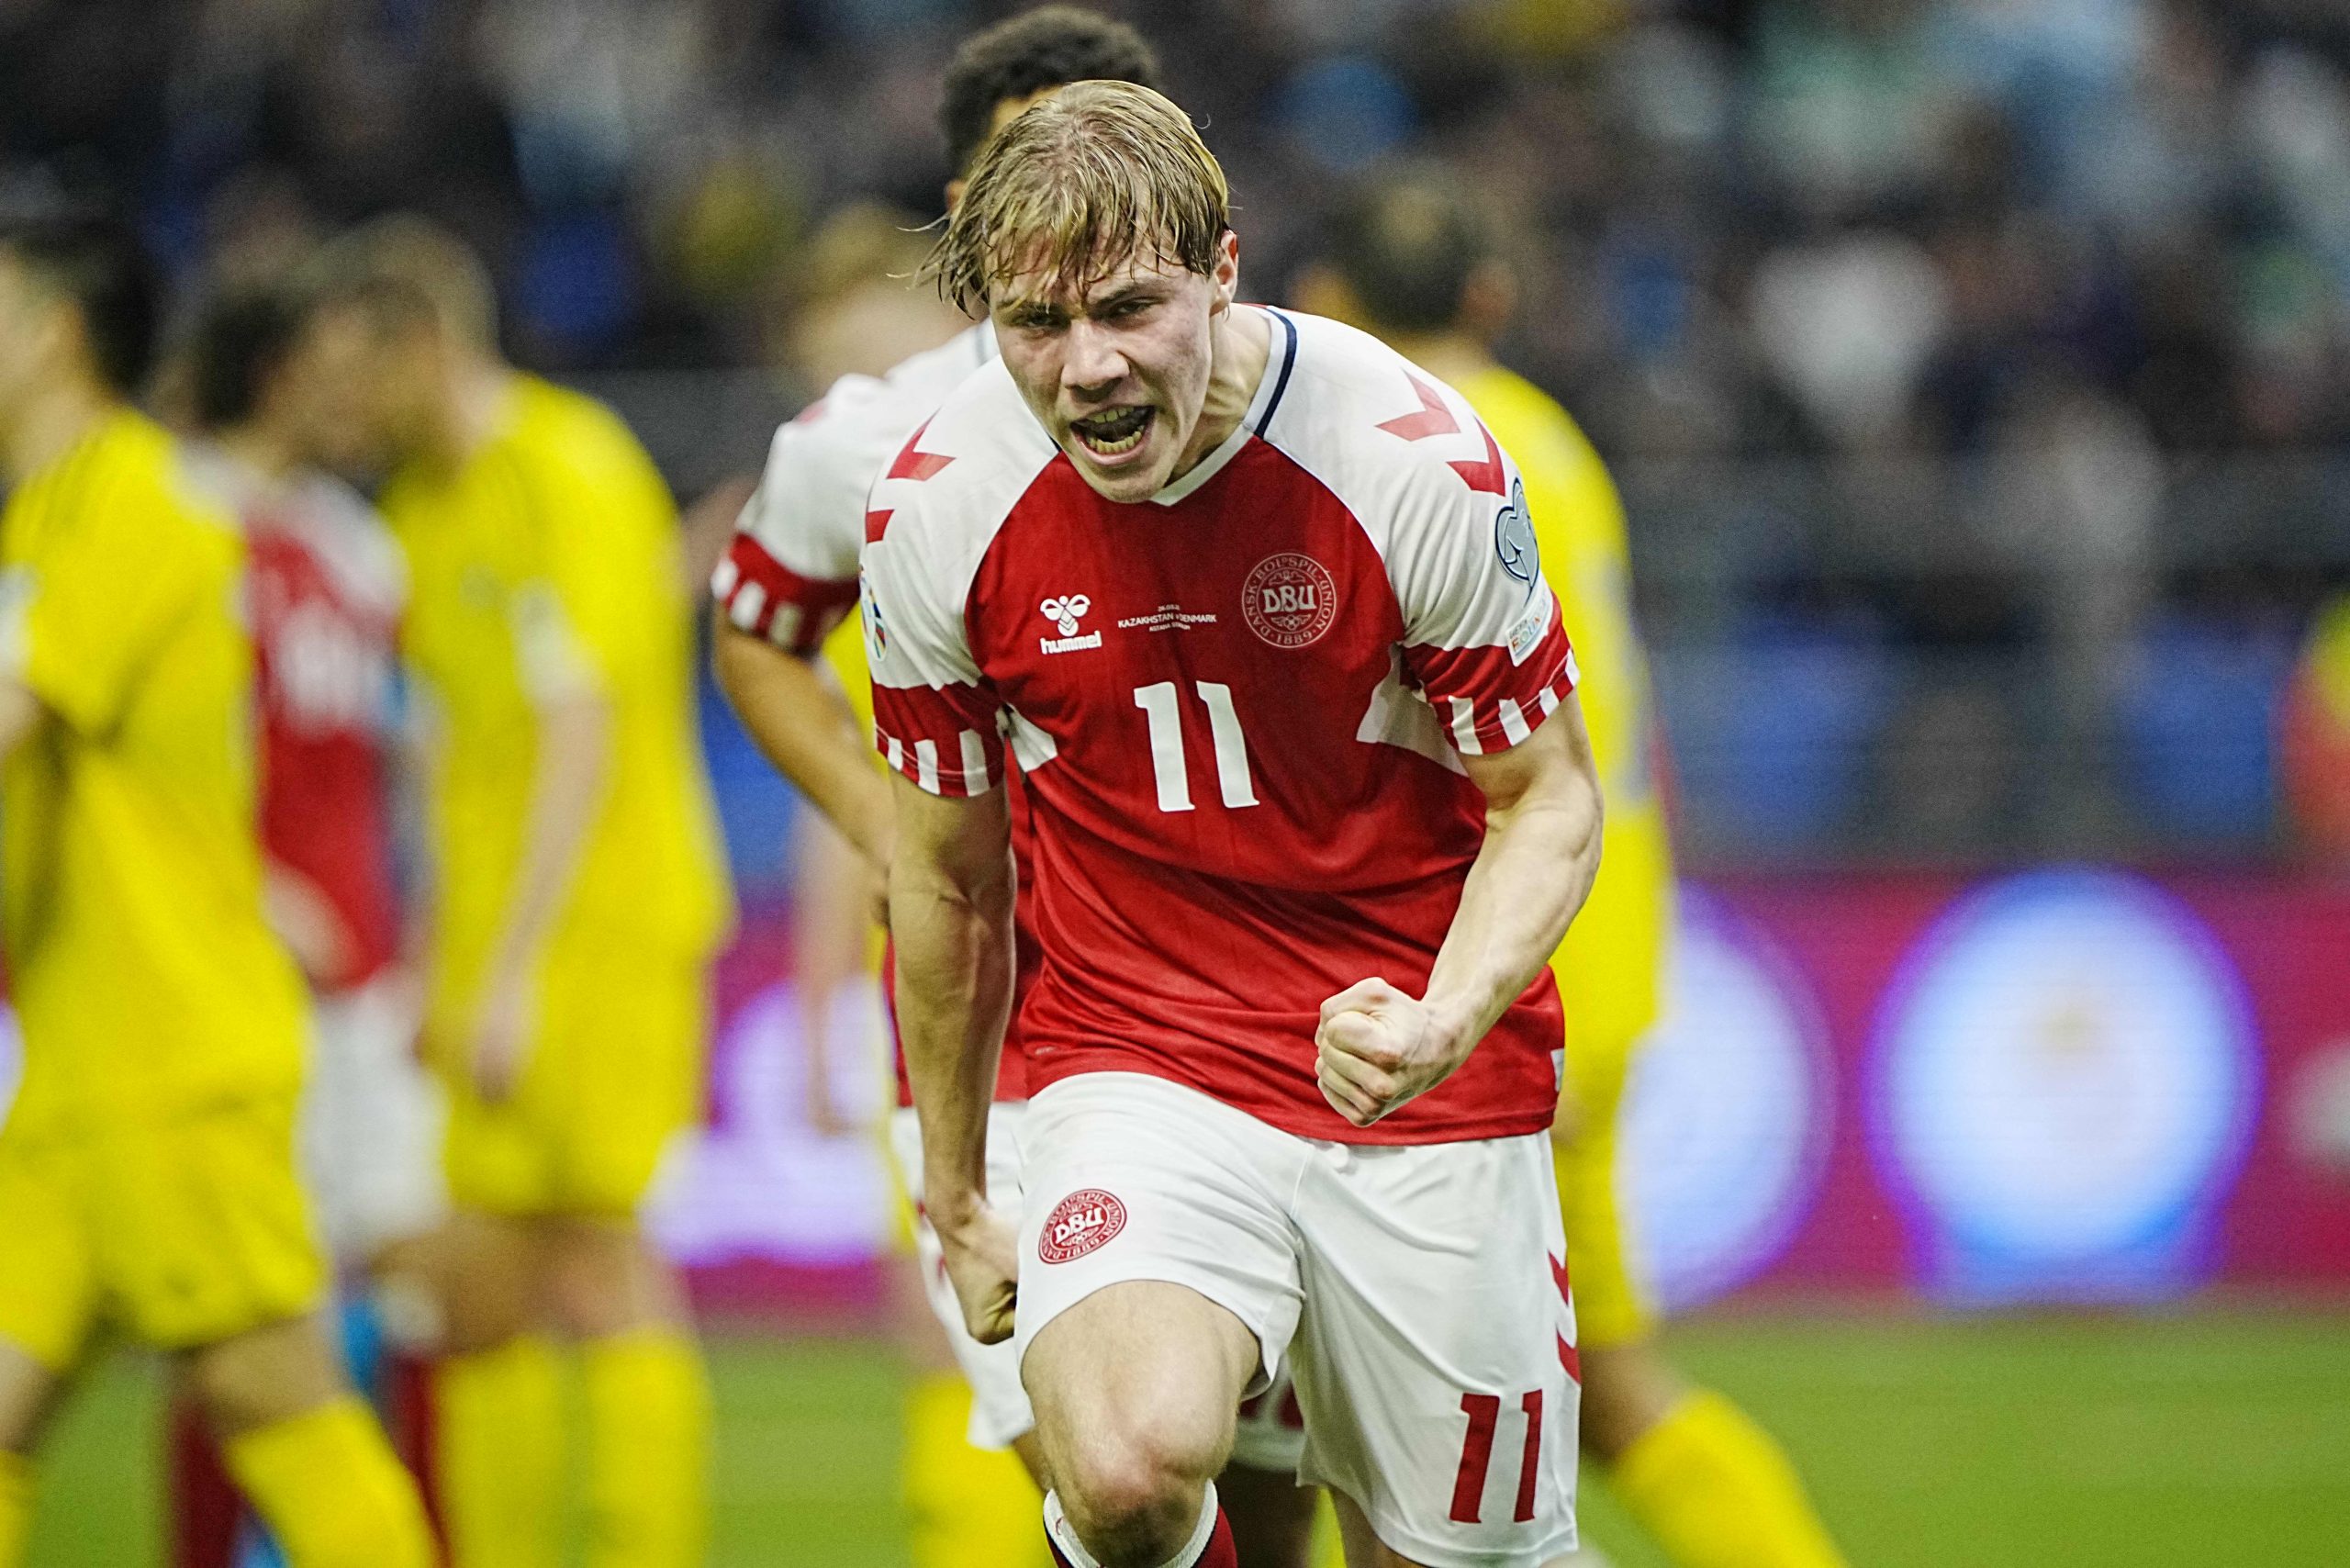 Chelsea have joined the race for Tottenham target Rasmus Hojlund.